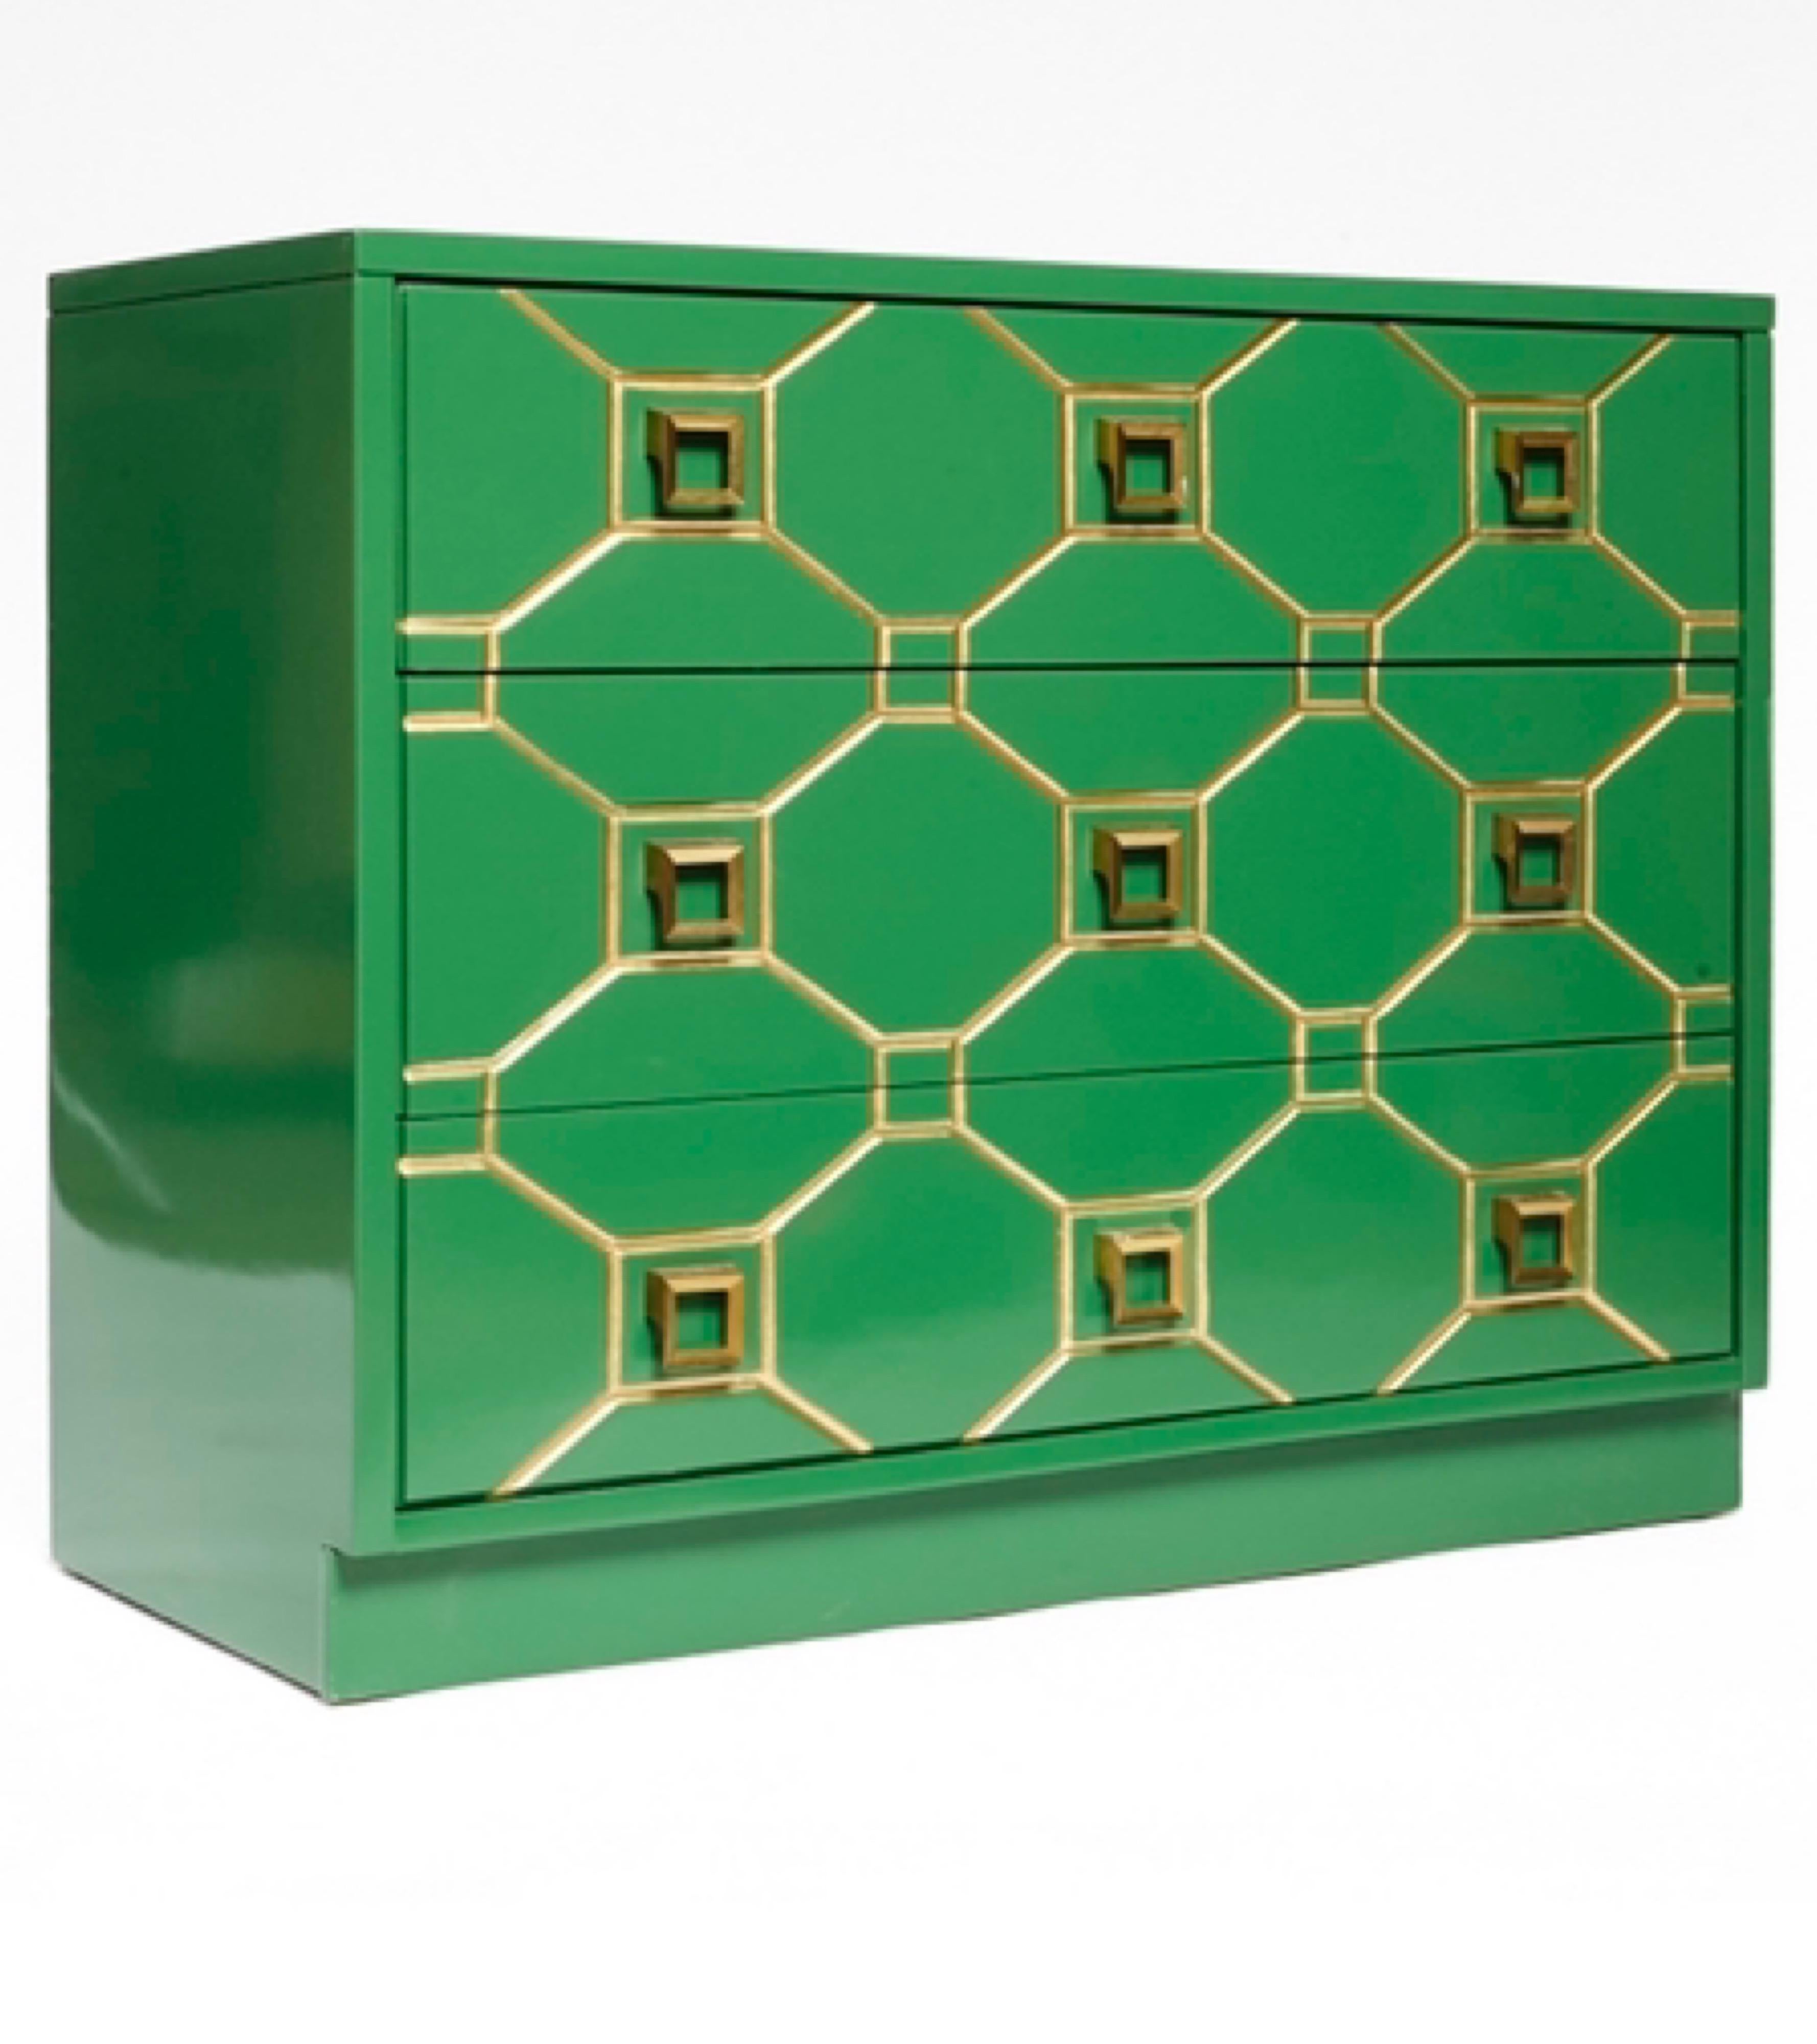 Beautiful pair of Dorothy Draper Viennese style lacquered chests shown in Benjamin Moore Seaweed Green, circa 1960. Incised pattern finished in gold highlights original honeycomb design, but all colors are customizable. i.e. Buyer may select any